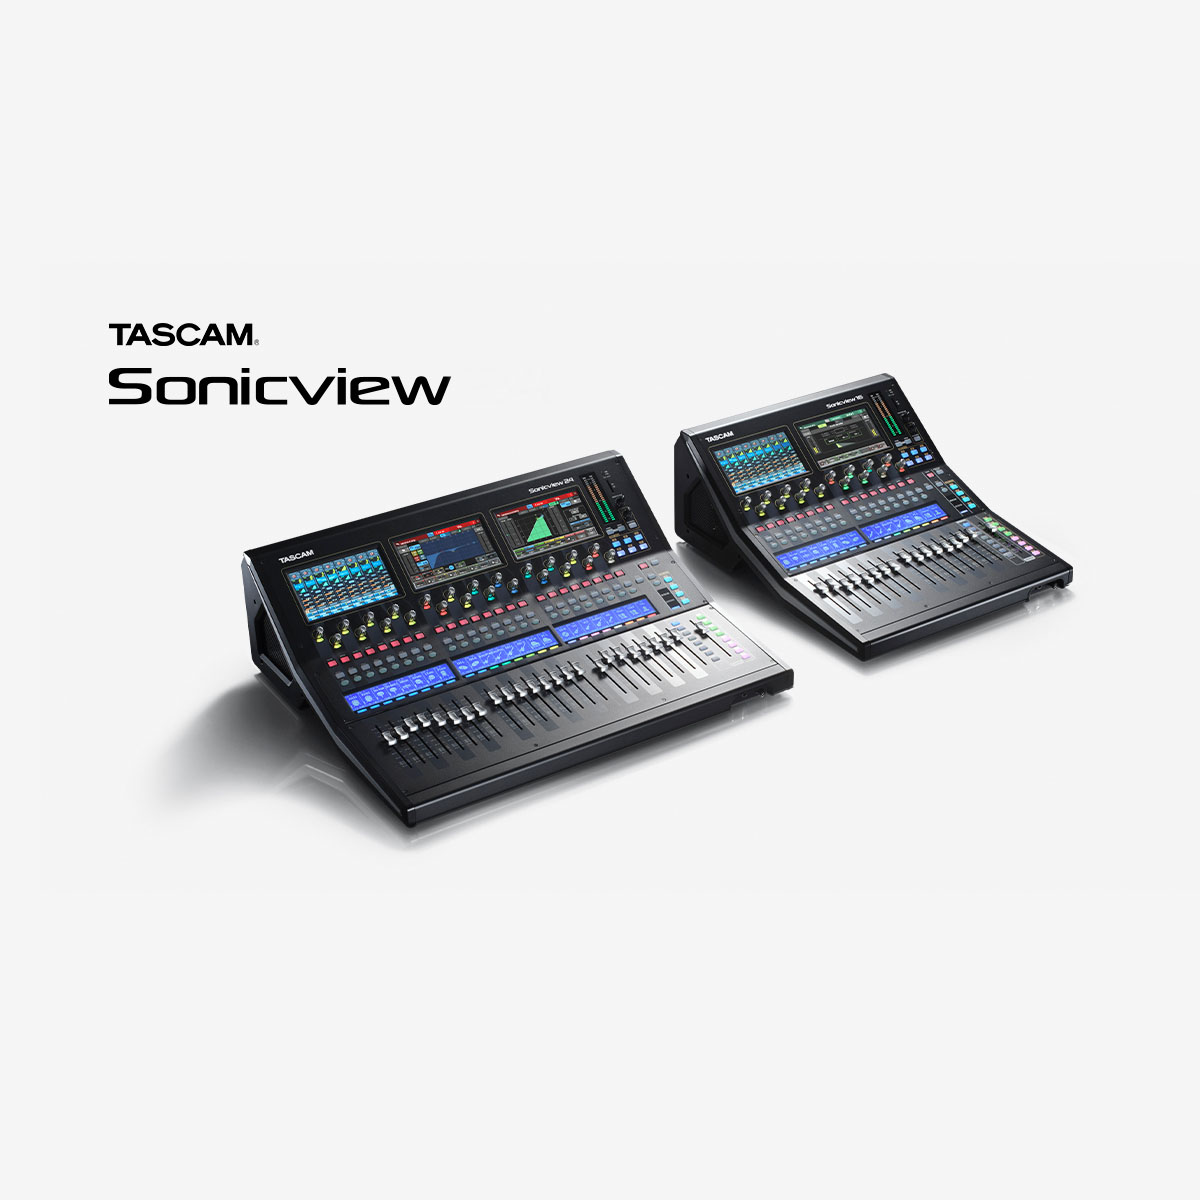 TASCAM Announces V1.5 Firmware Update for the Sonicview 16/24 Digital Mixer